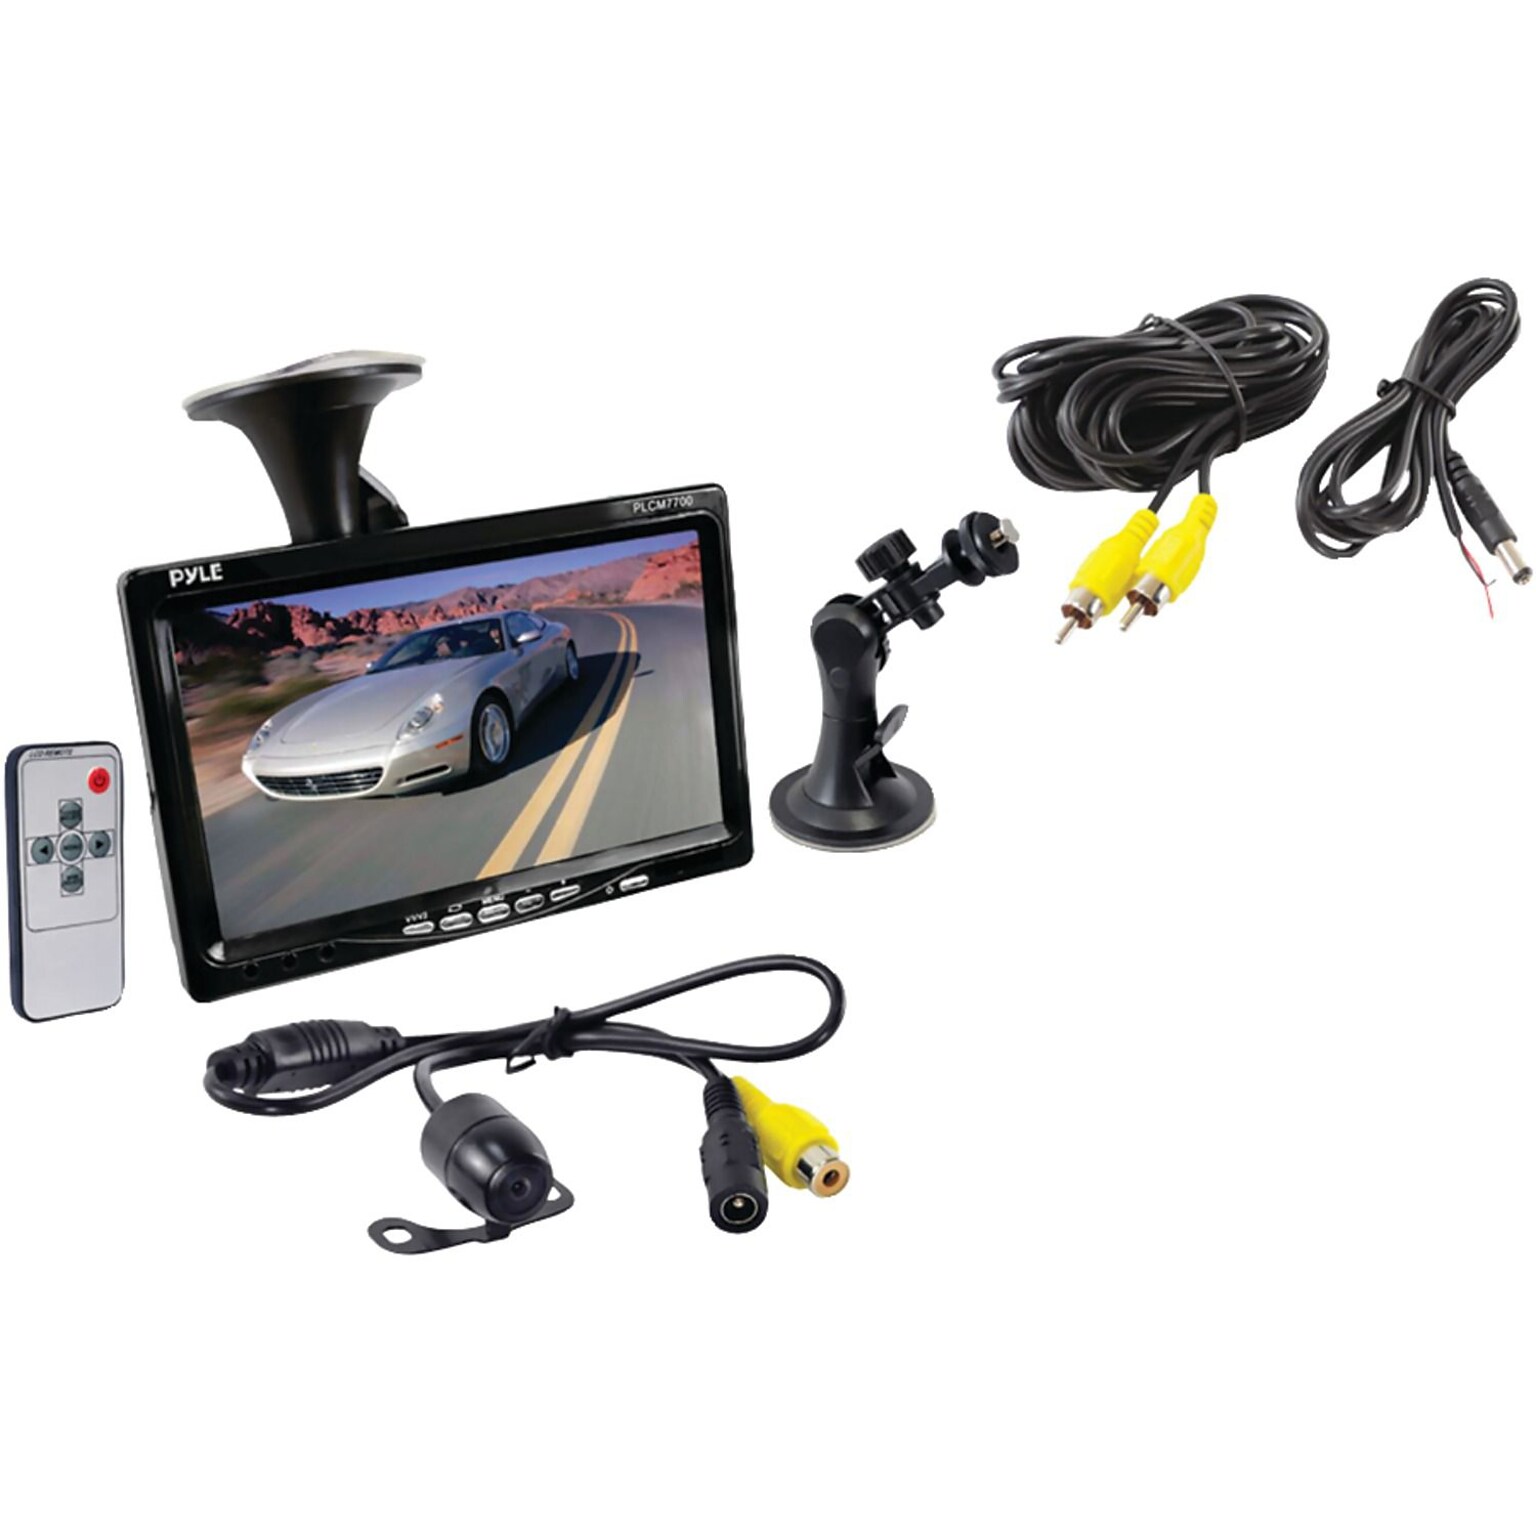 Pyle Rear View Backup Camera and Monitor System with 7 LCD Display (PLCM7700)